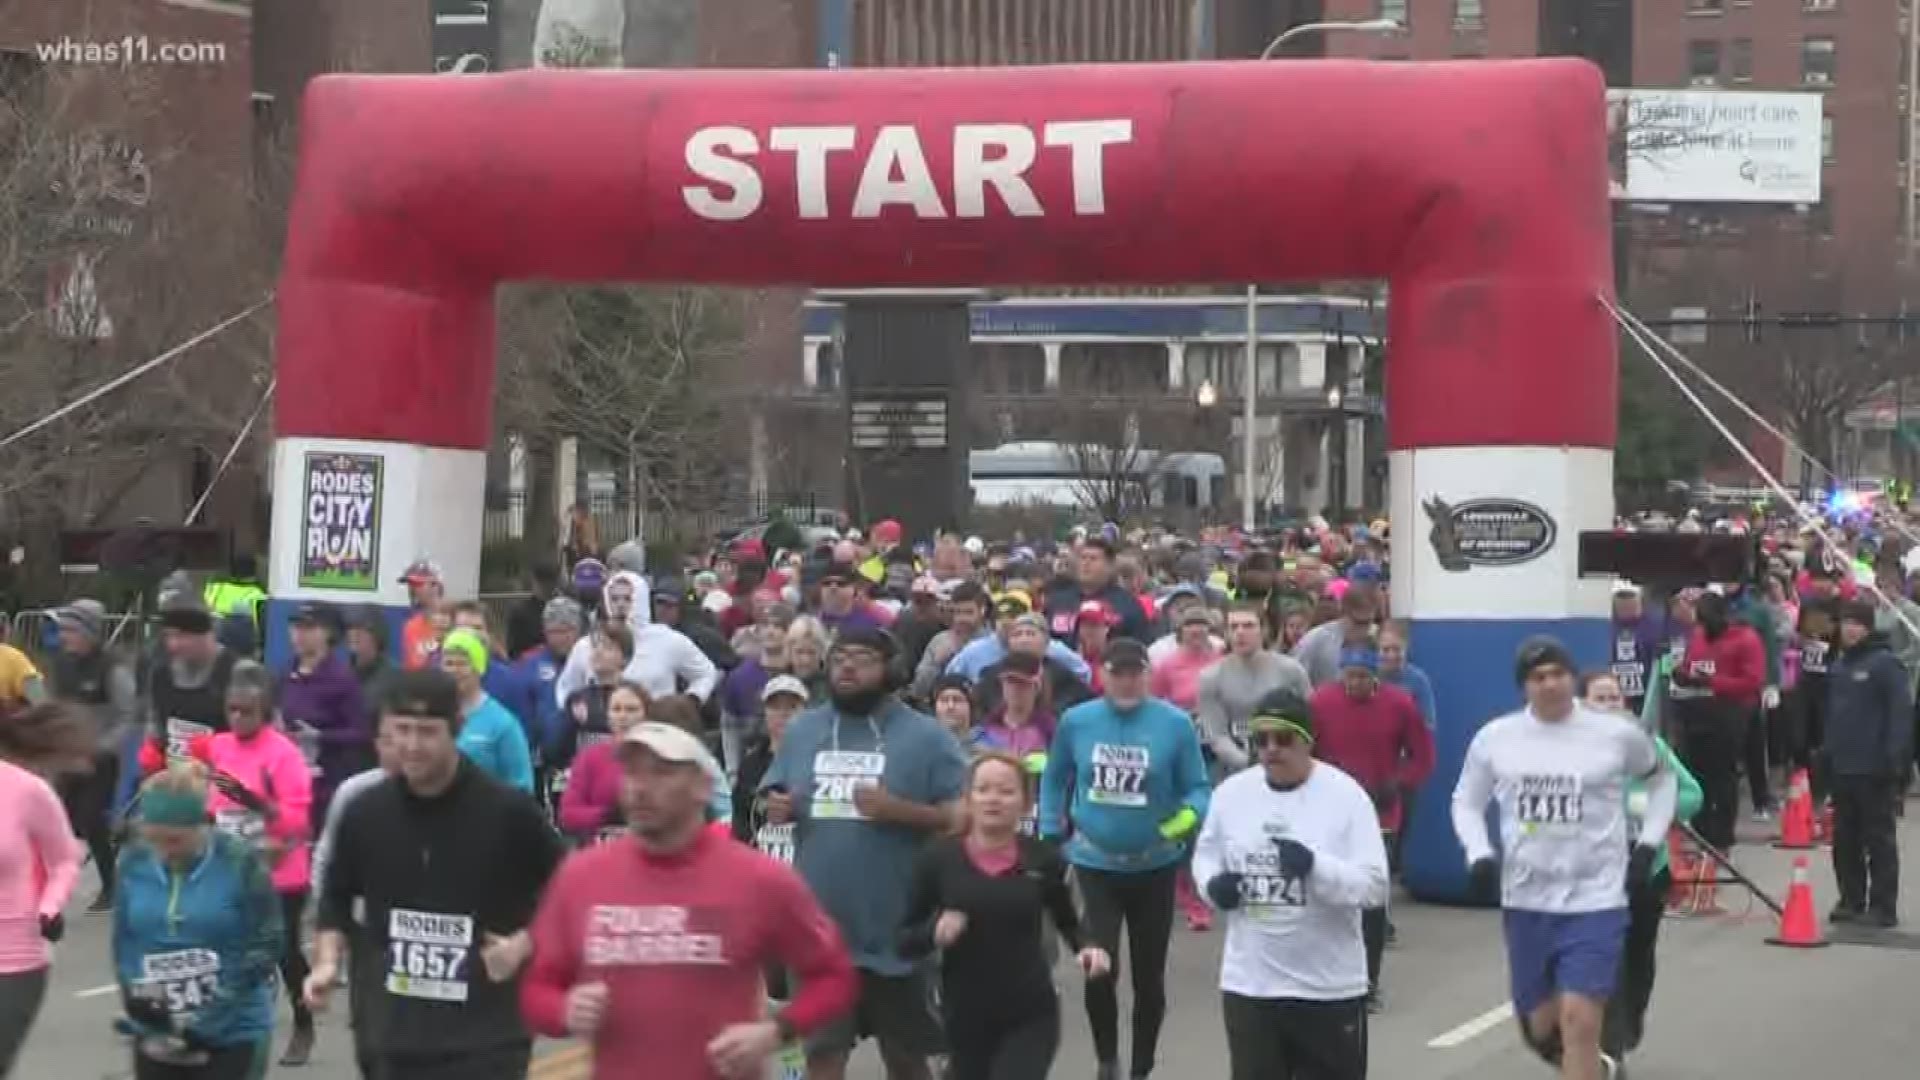 The rain held off this morning for the 39th running of the Rodes City Run 10K which benefits the WHAS Crusade for Children.